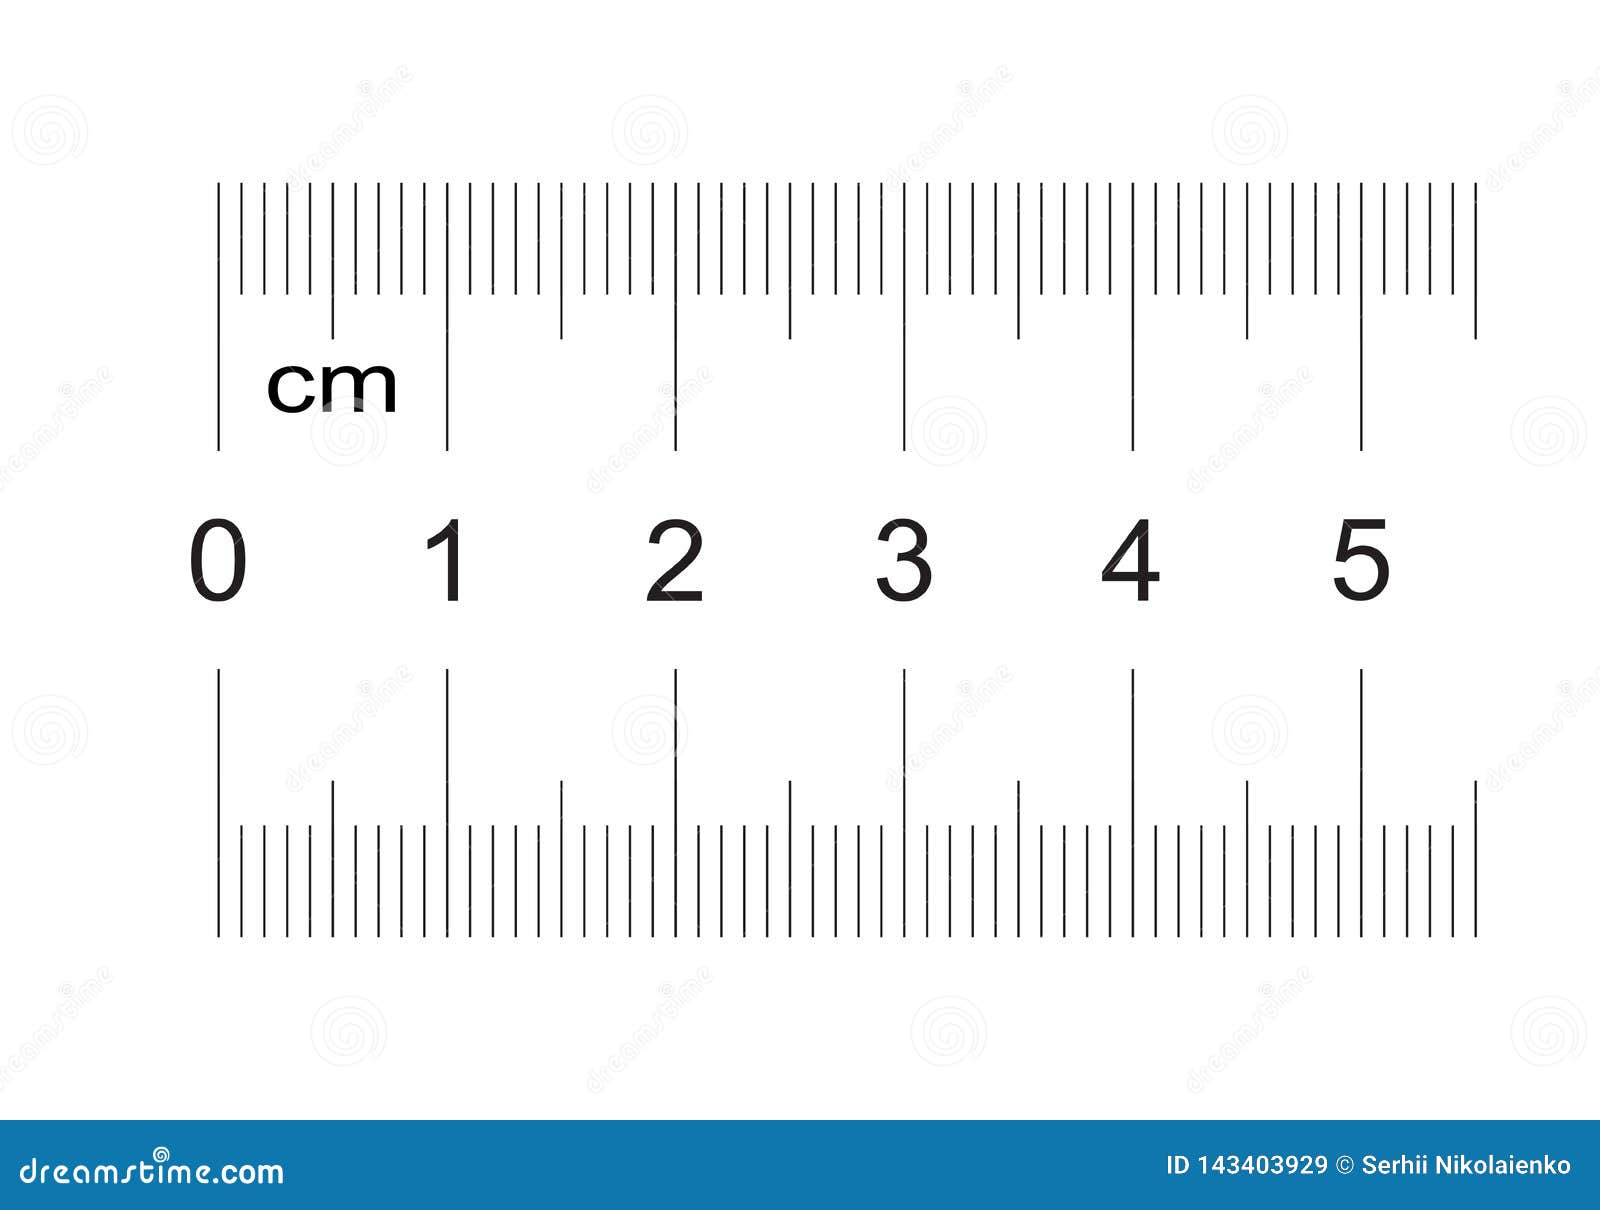 Ruler Of 50 Millimeters Ruler Of 5 Centimeters Calibration Grid Value Division 1 Mm Two Sided Measuring Instrument Stock Illustration Illustration Of Graphic Instrument